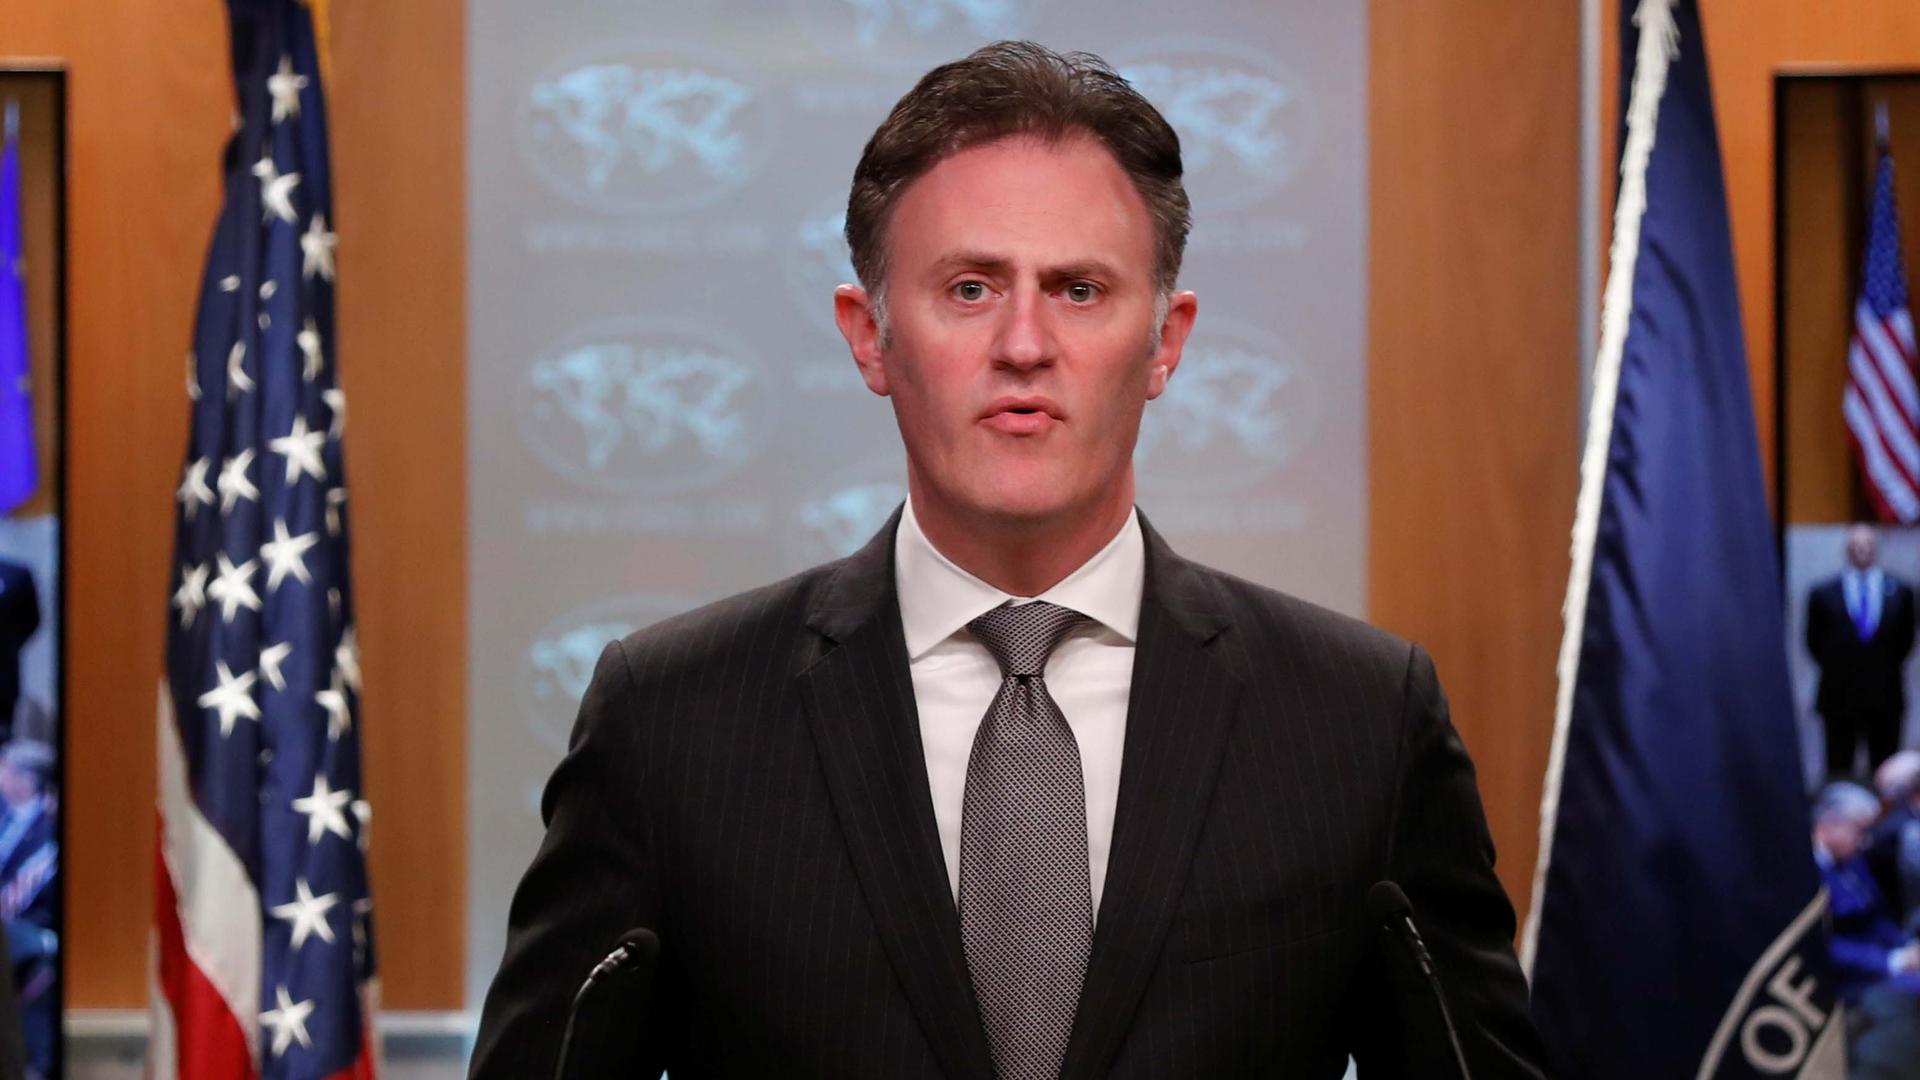 Ambassador Nathan Sales speaks during a news conference at the State Department in Washington, DC, on Nov. 14, 2019.